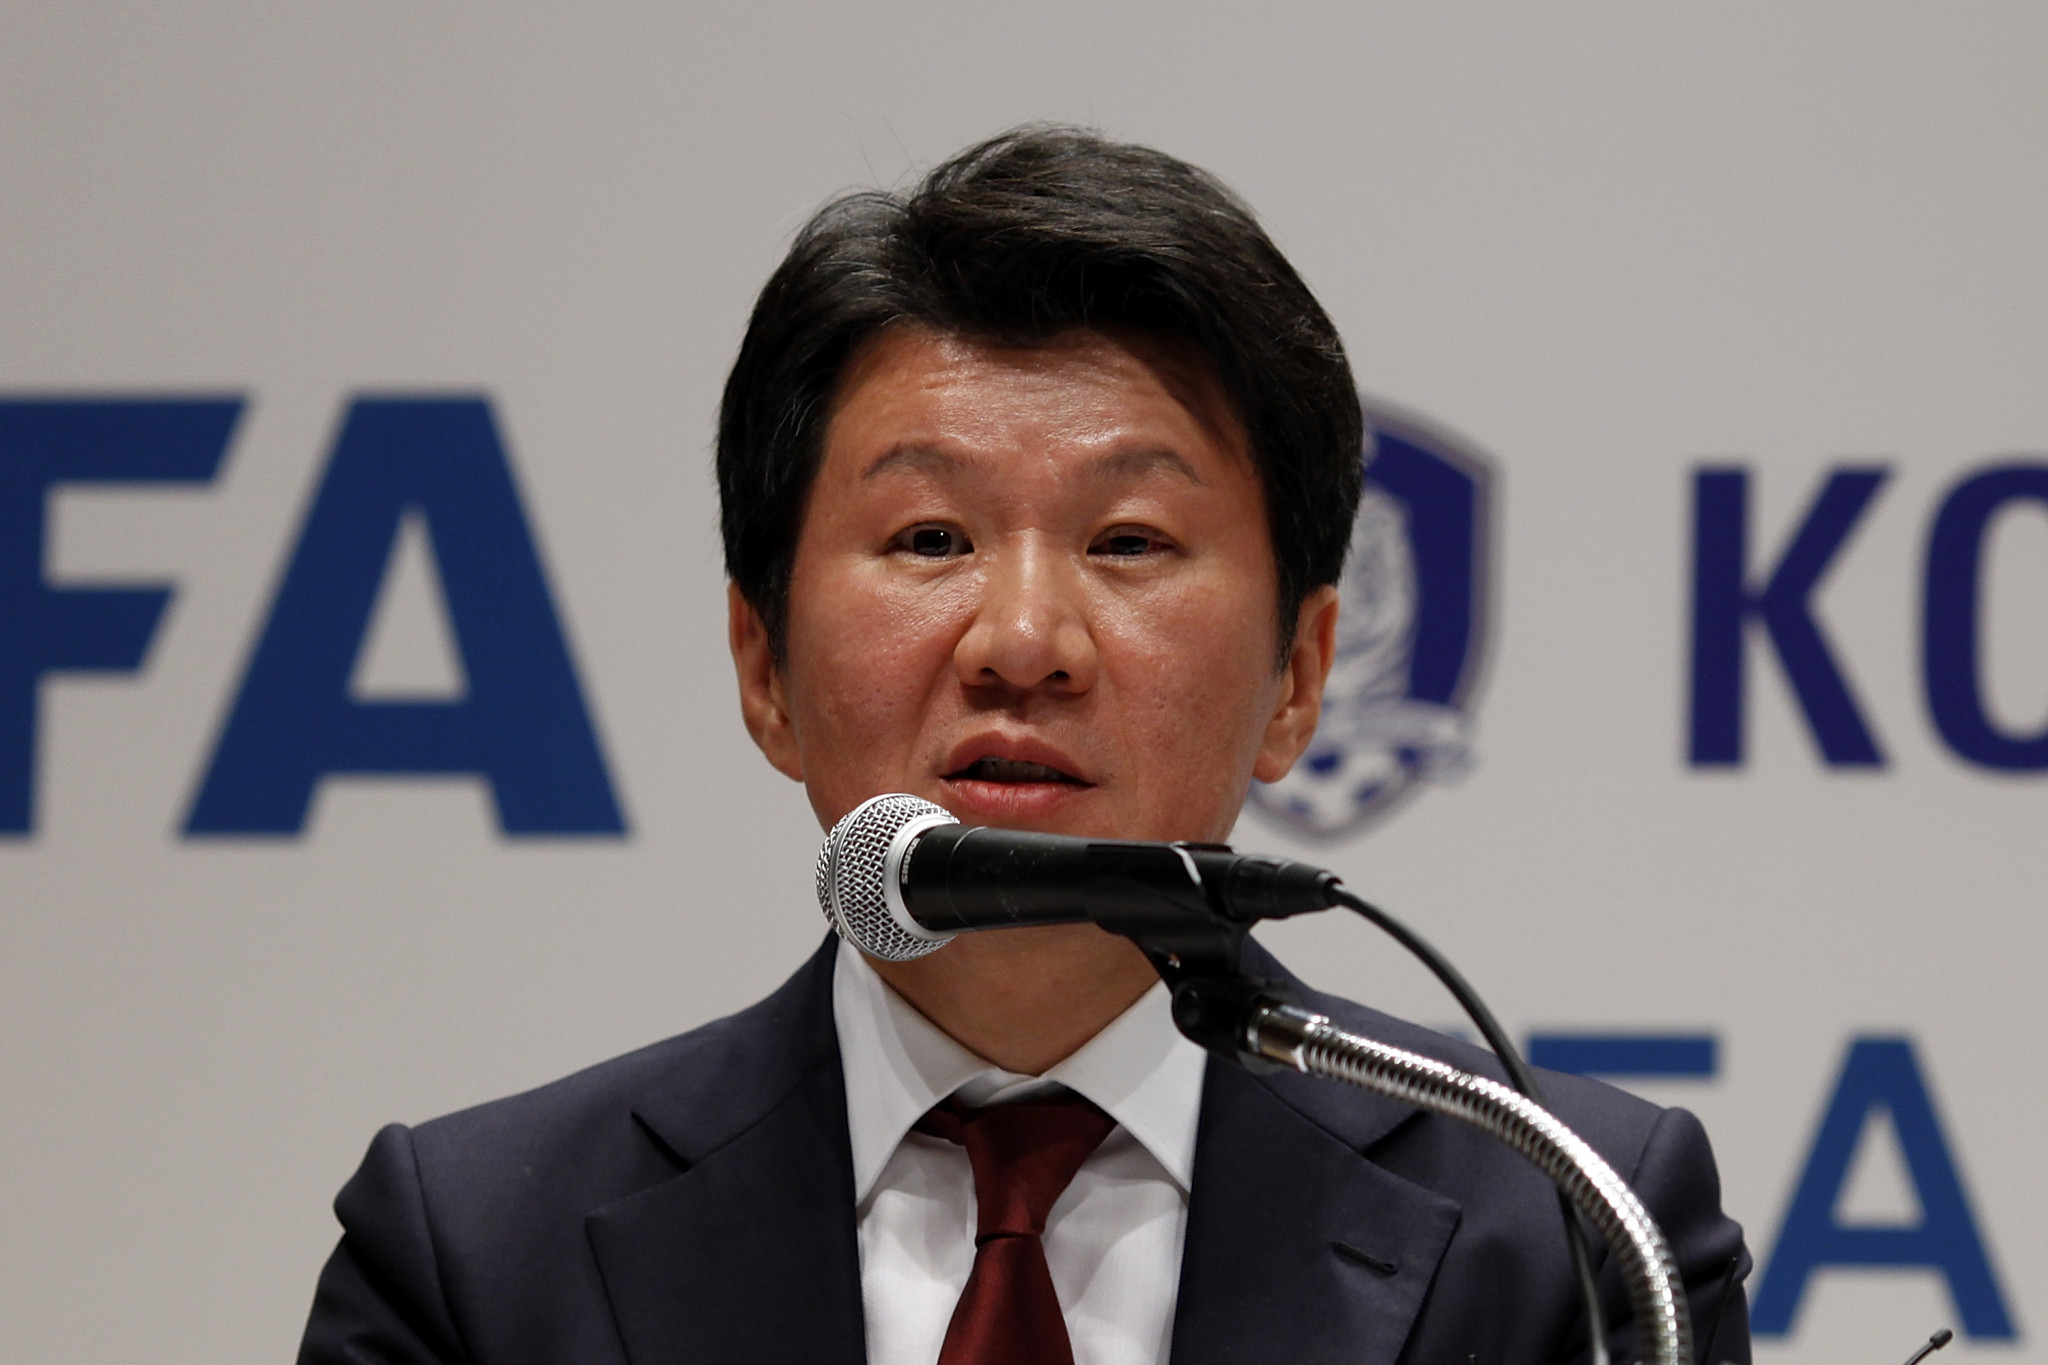 KFA President Chung Mong-gyu said he plans to meet with AFC Executive Committee members to discuss South Korea's bid ©Getty Images